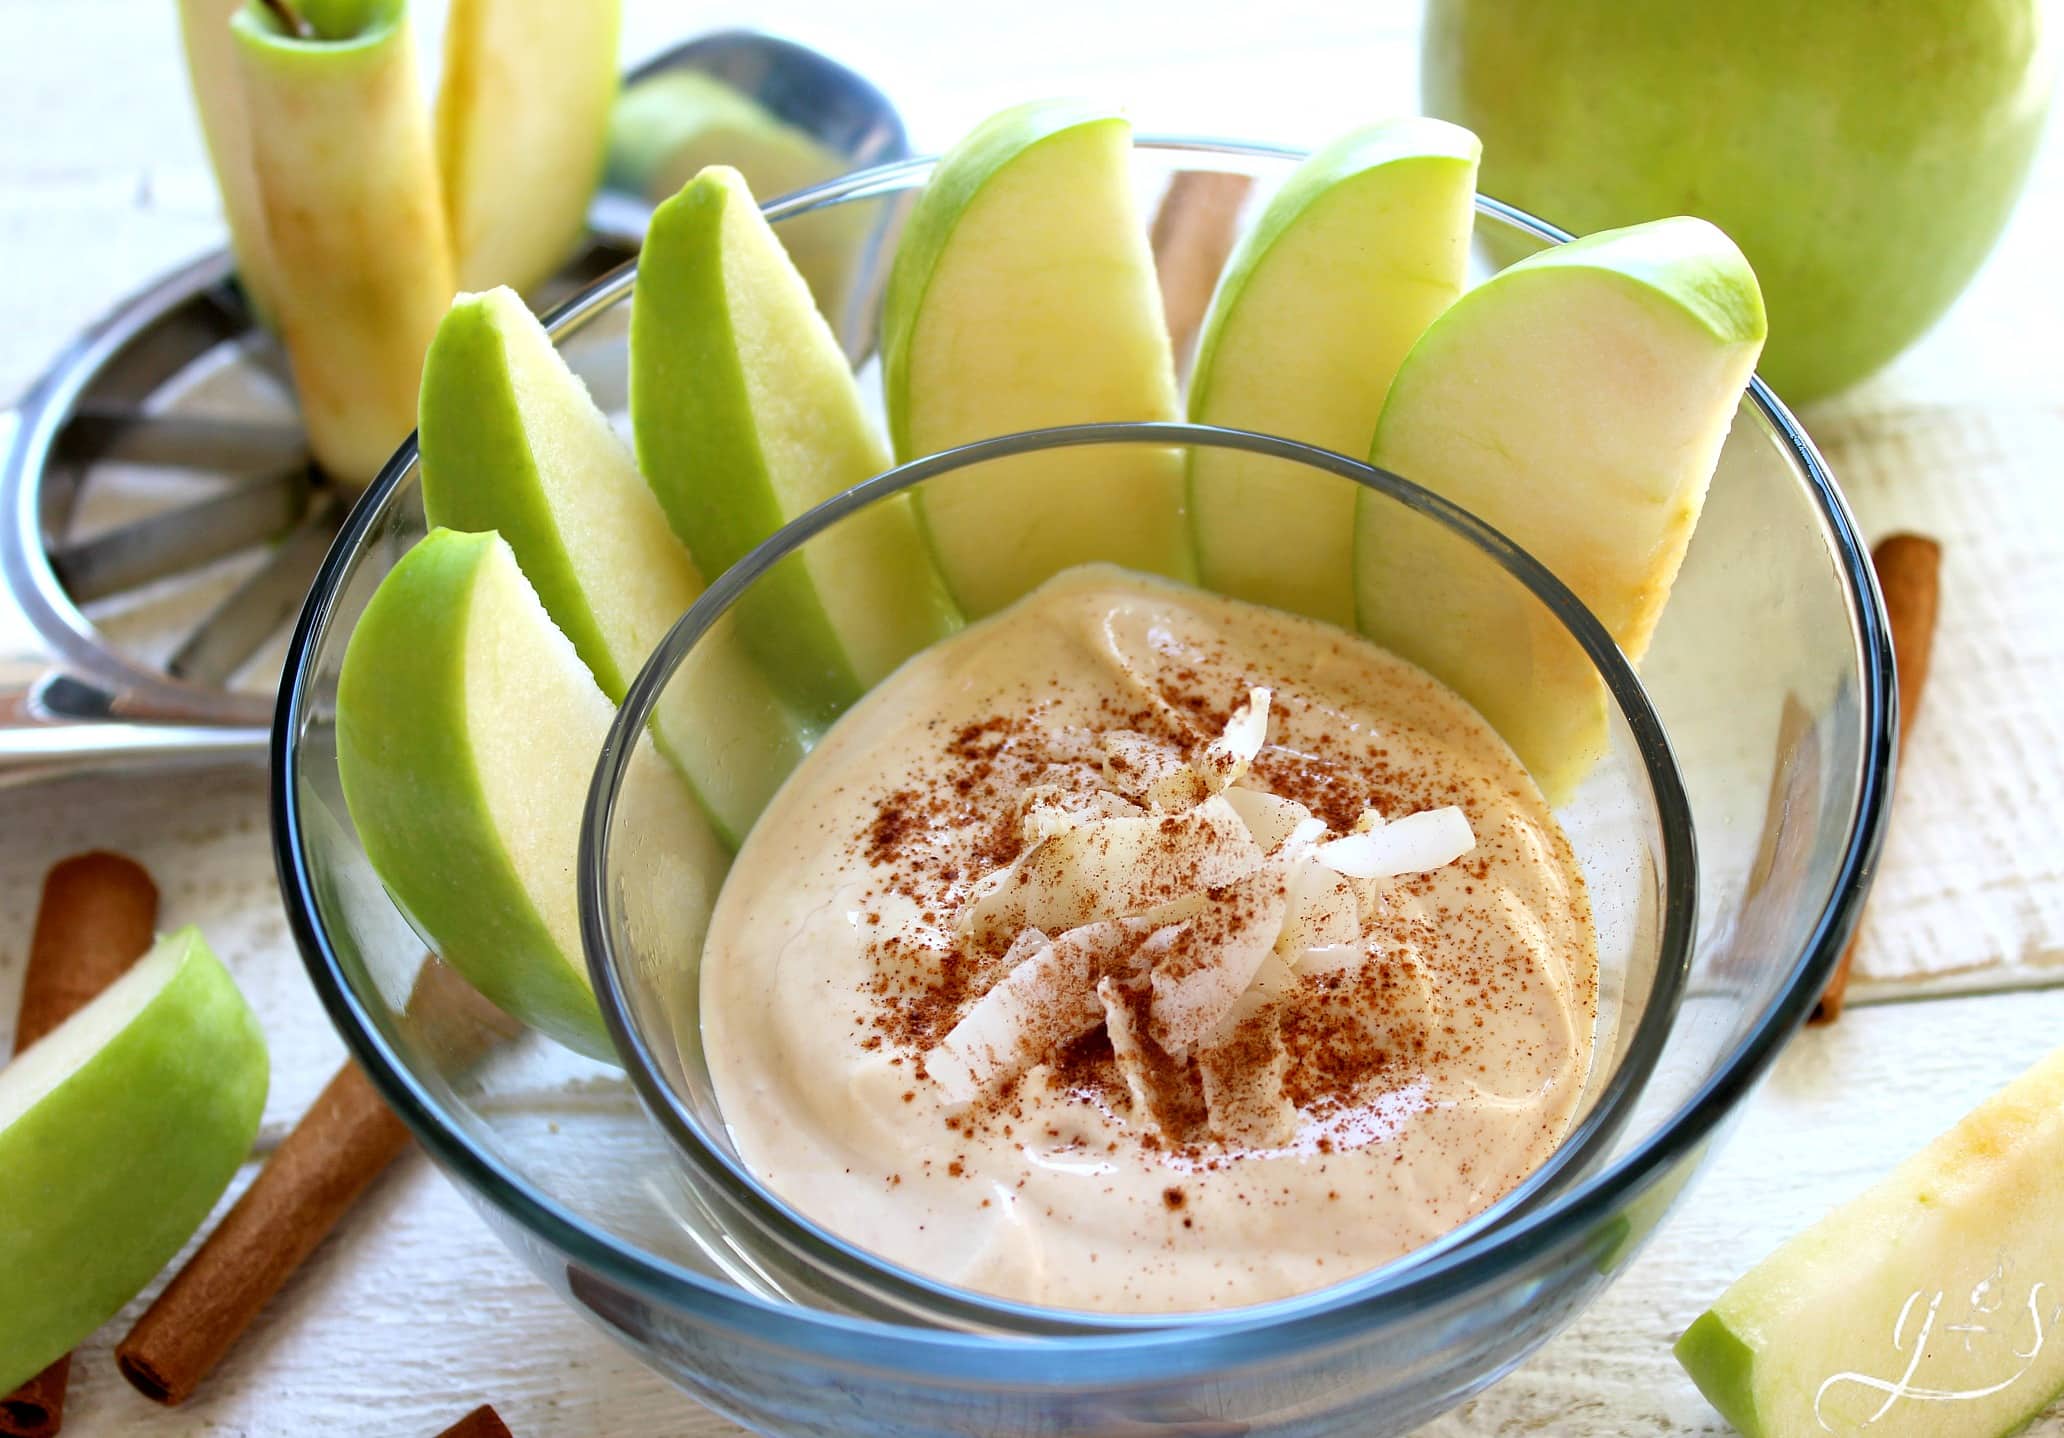 Clear glass bowl of PB2 fruit dip sprinkled with cinnamon with green apples